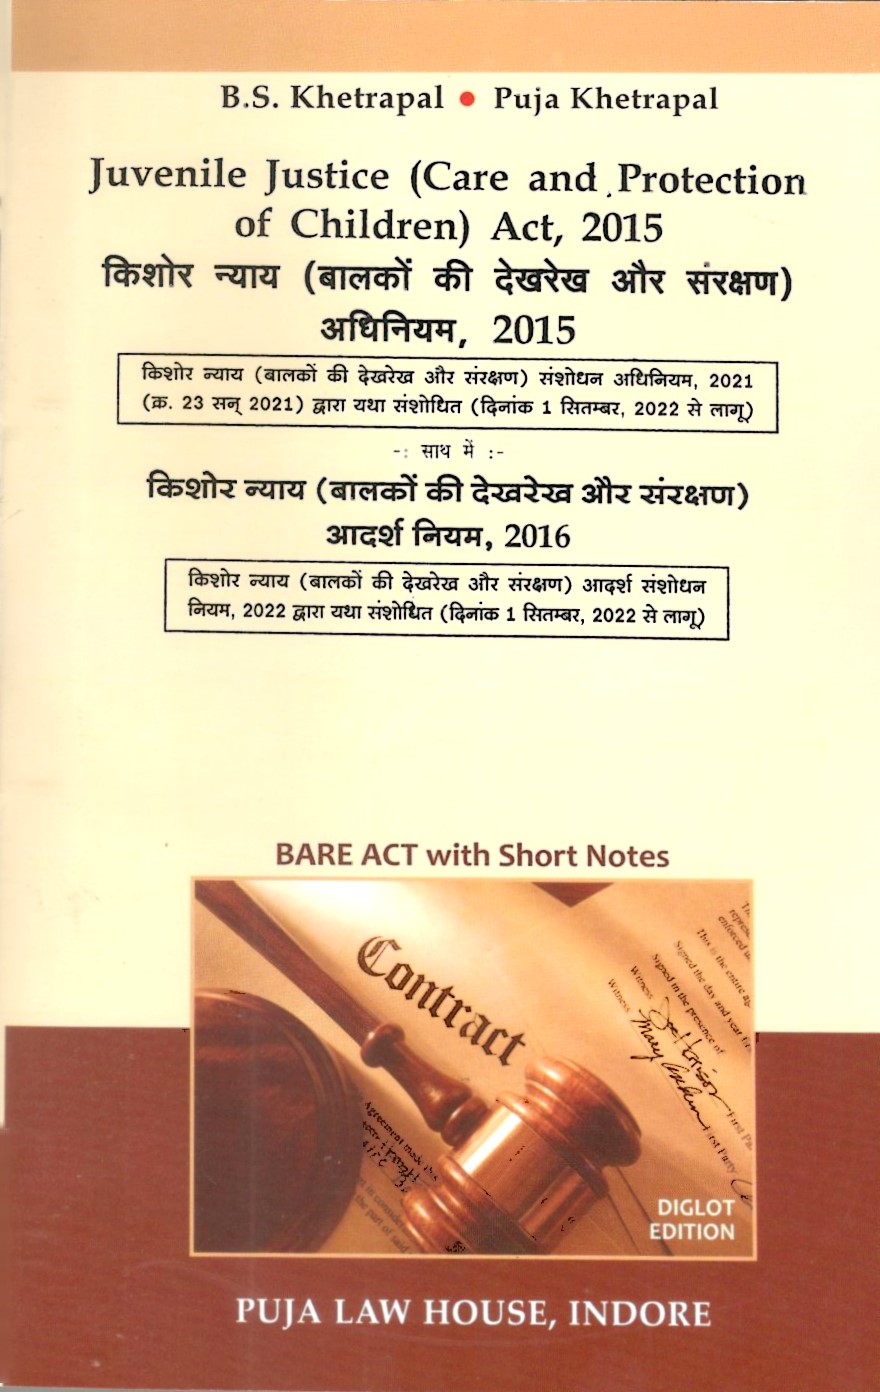 Juvenile Justice (Care and Protection of Children) Act, 2015 / किशोर न्याय (बालको की देख-रेख और संरक्षण) अधिनियम, 2015 alongwith |  साथ में  Juvenile Justice (Care and Protection of Children) Model Rules, 2016 / किशोर न्याय (बालको की देख-रेख और संरक्षण)  आदर्श नियम, 2016